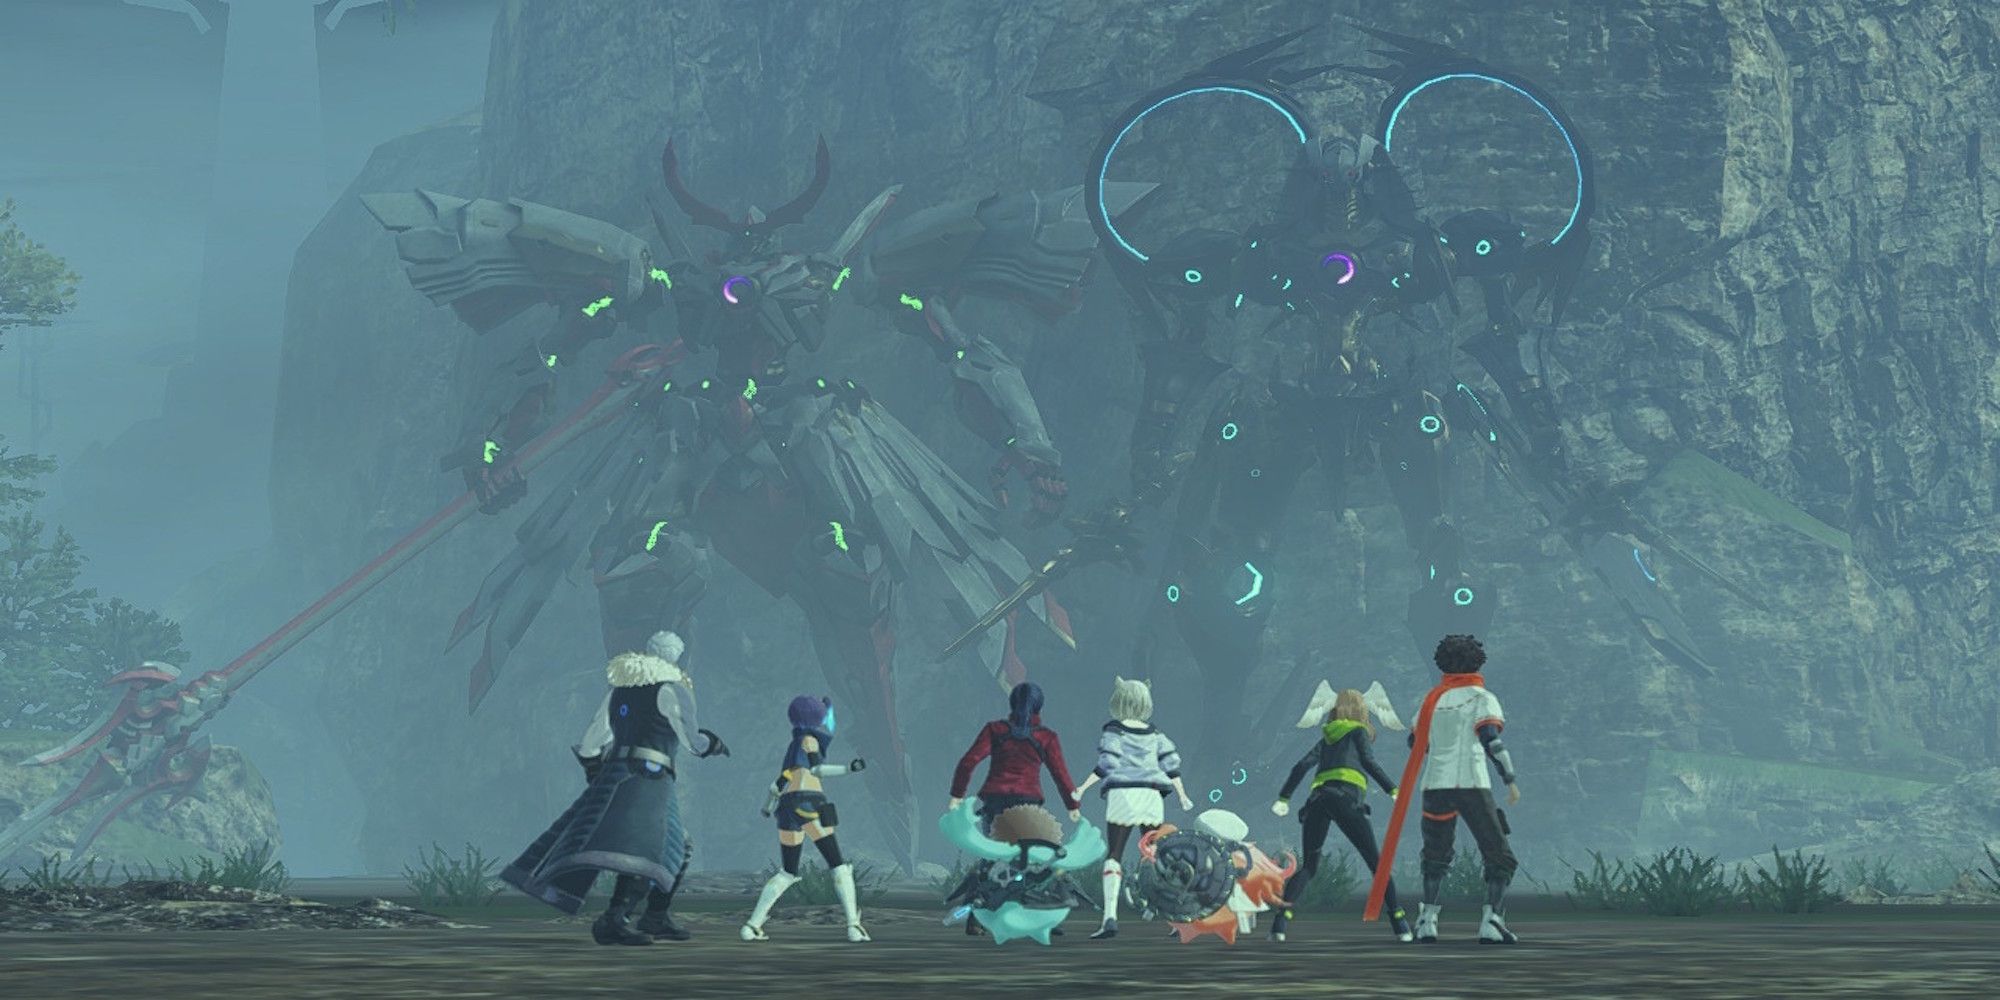 A cutscene featuring characters in Xenoblade Chronicles 3